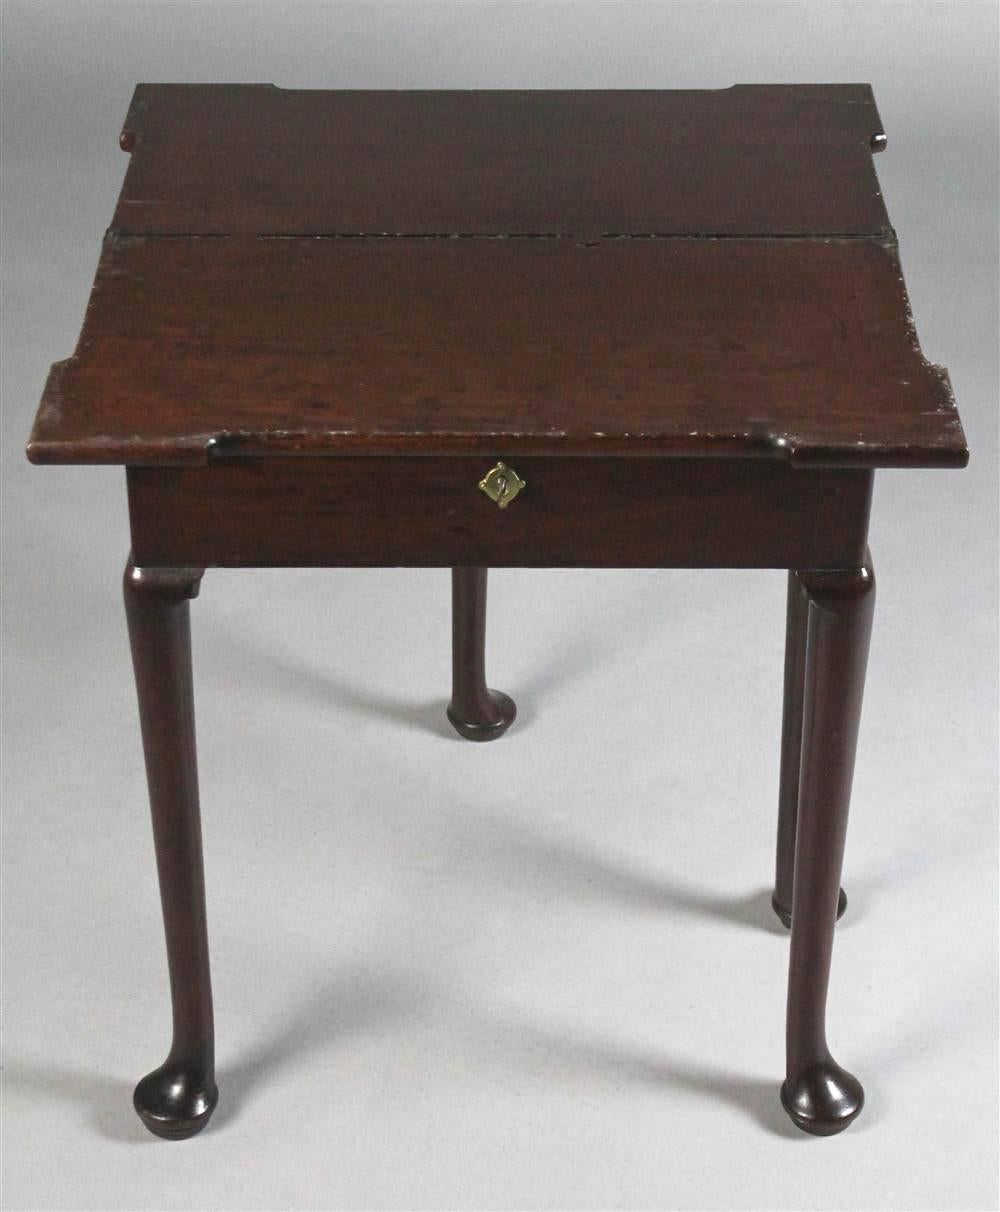 Diminutive George II Games Table (possibly a child